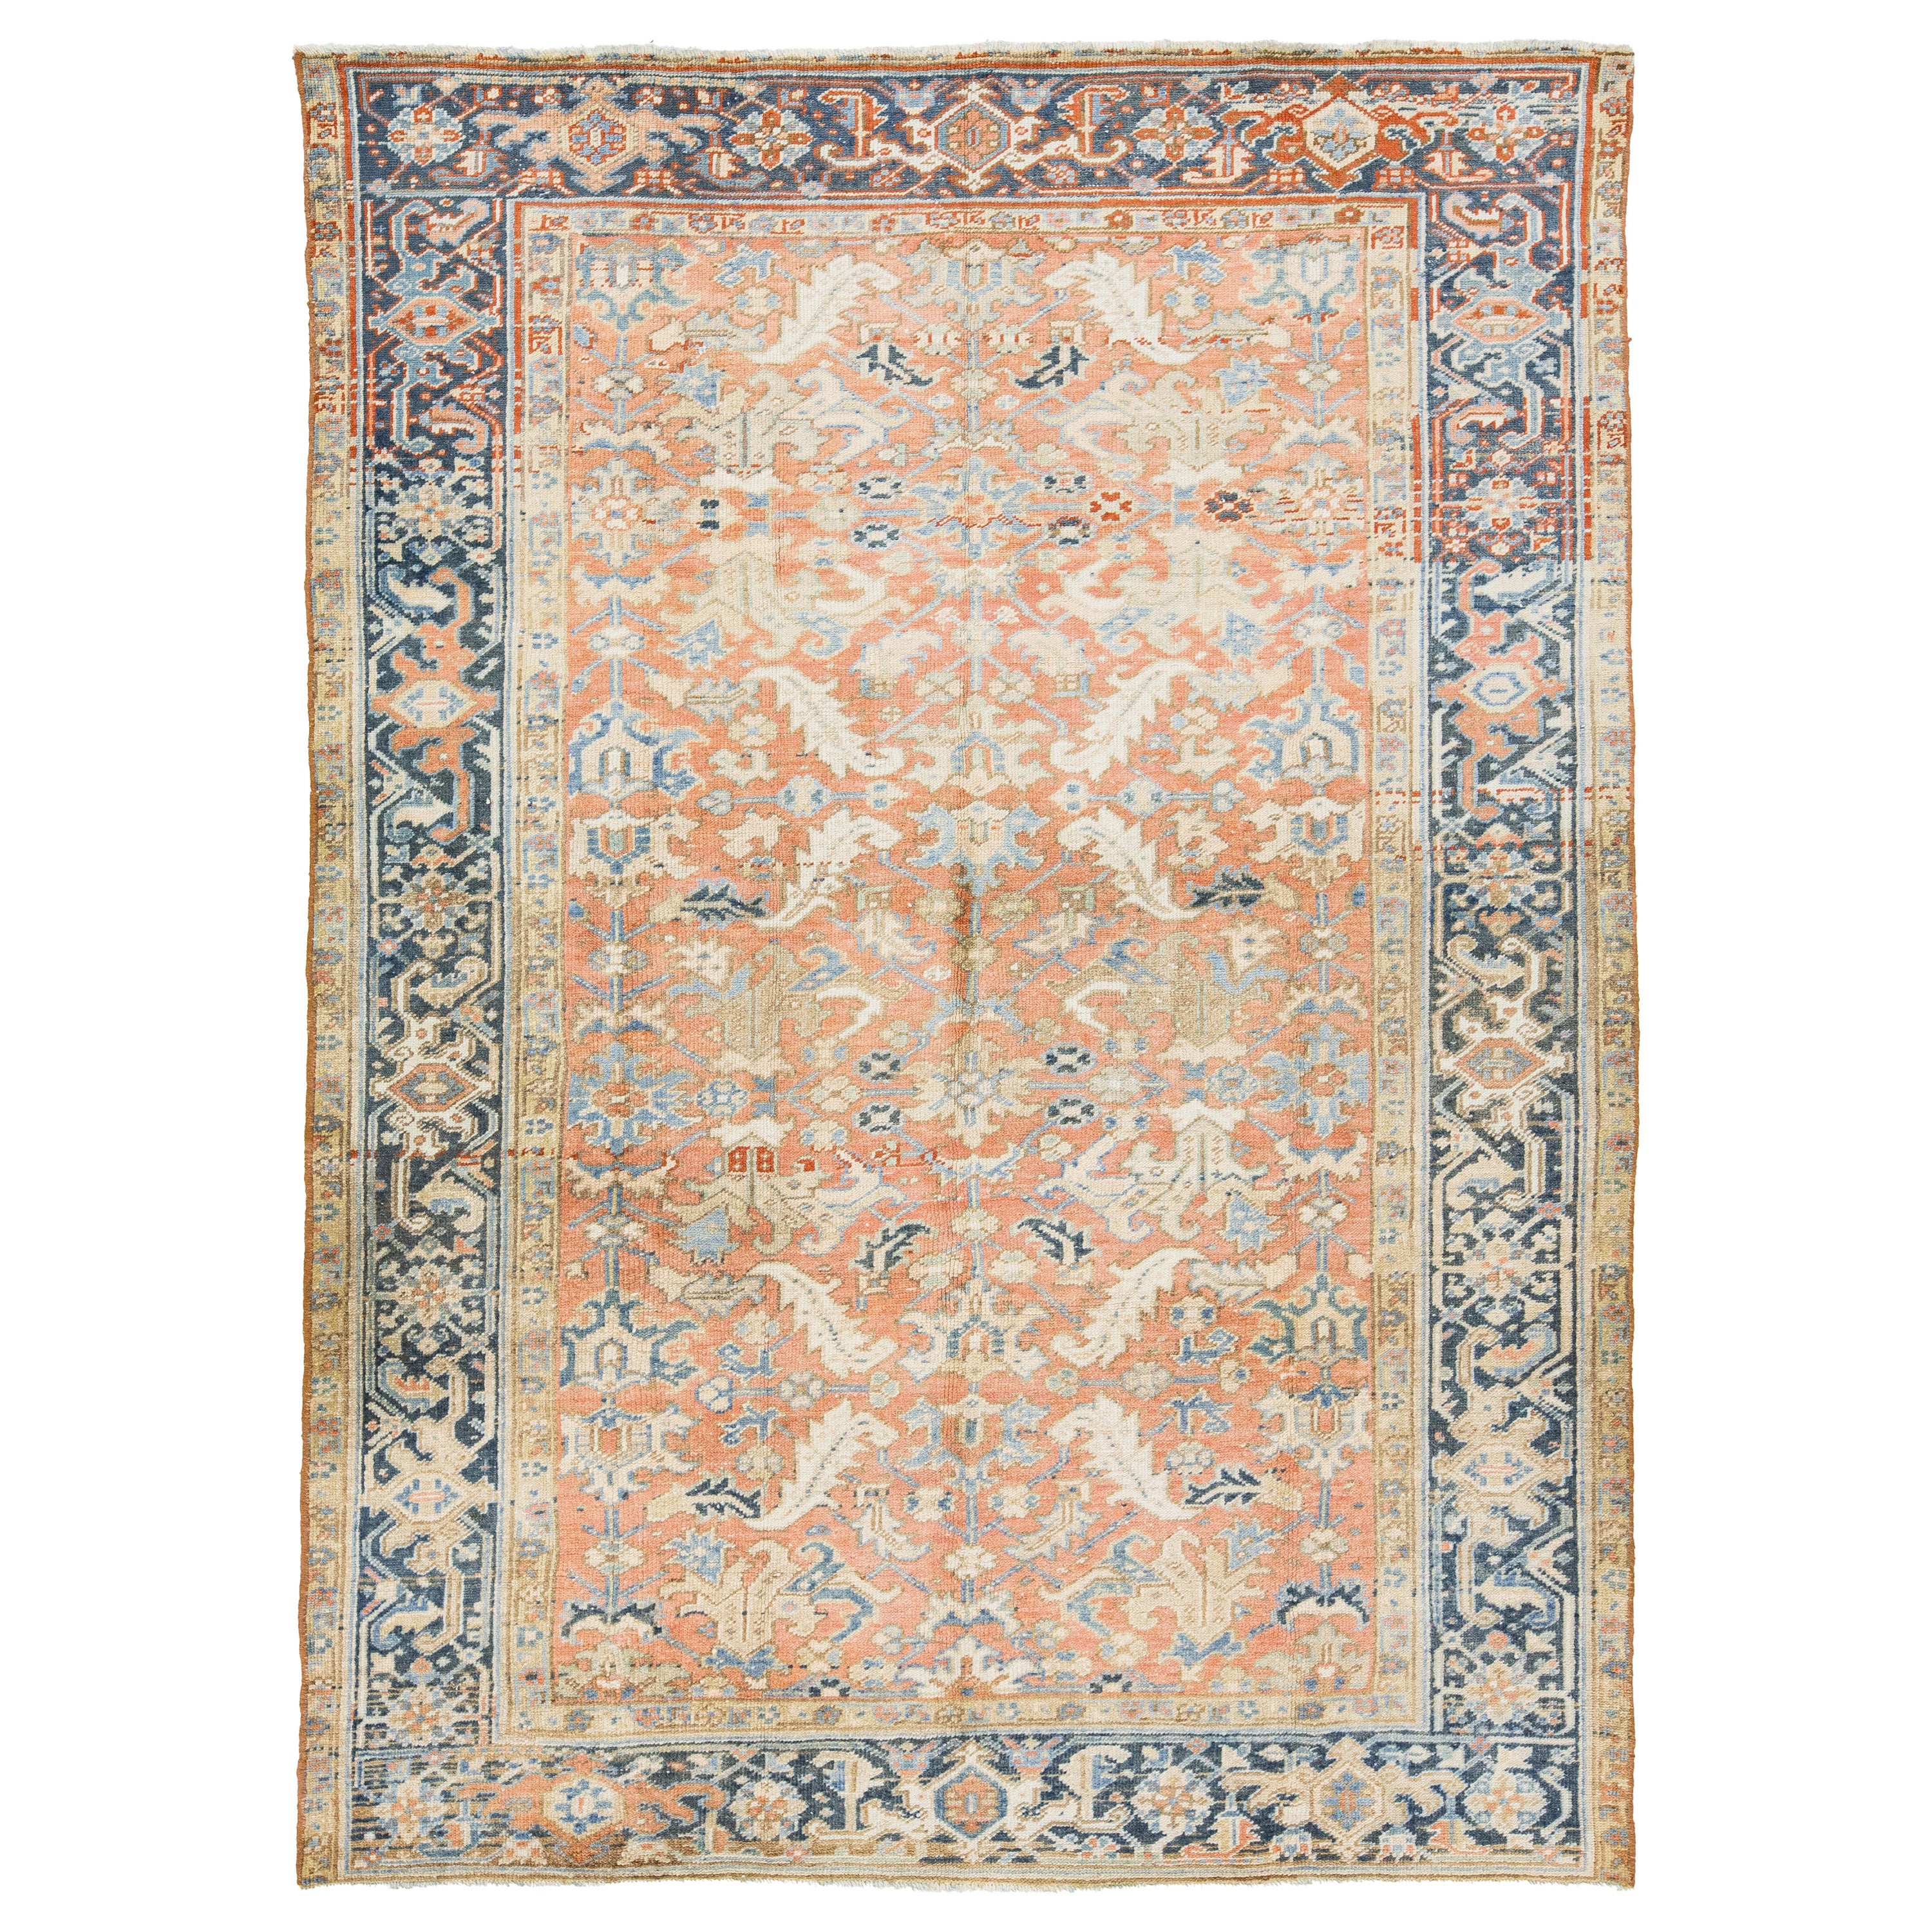 Antique Hand-knotted Persian Heriz Wool Rug In Peach With Allover Motif